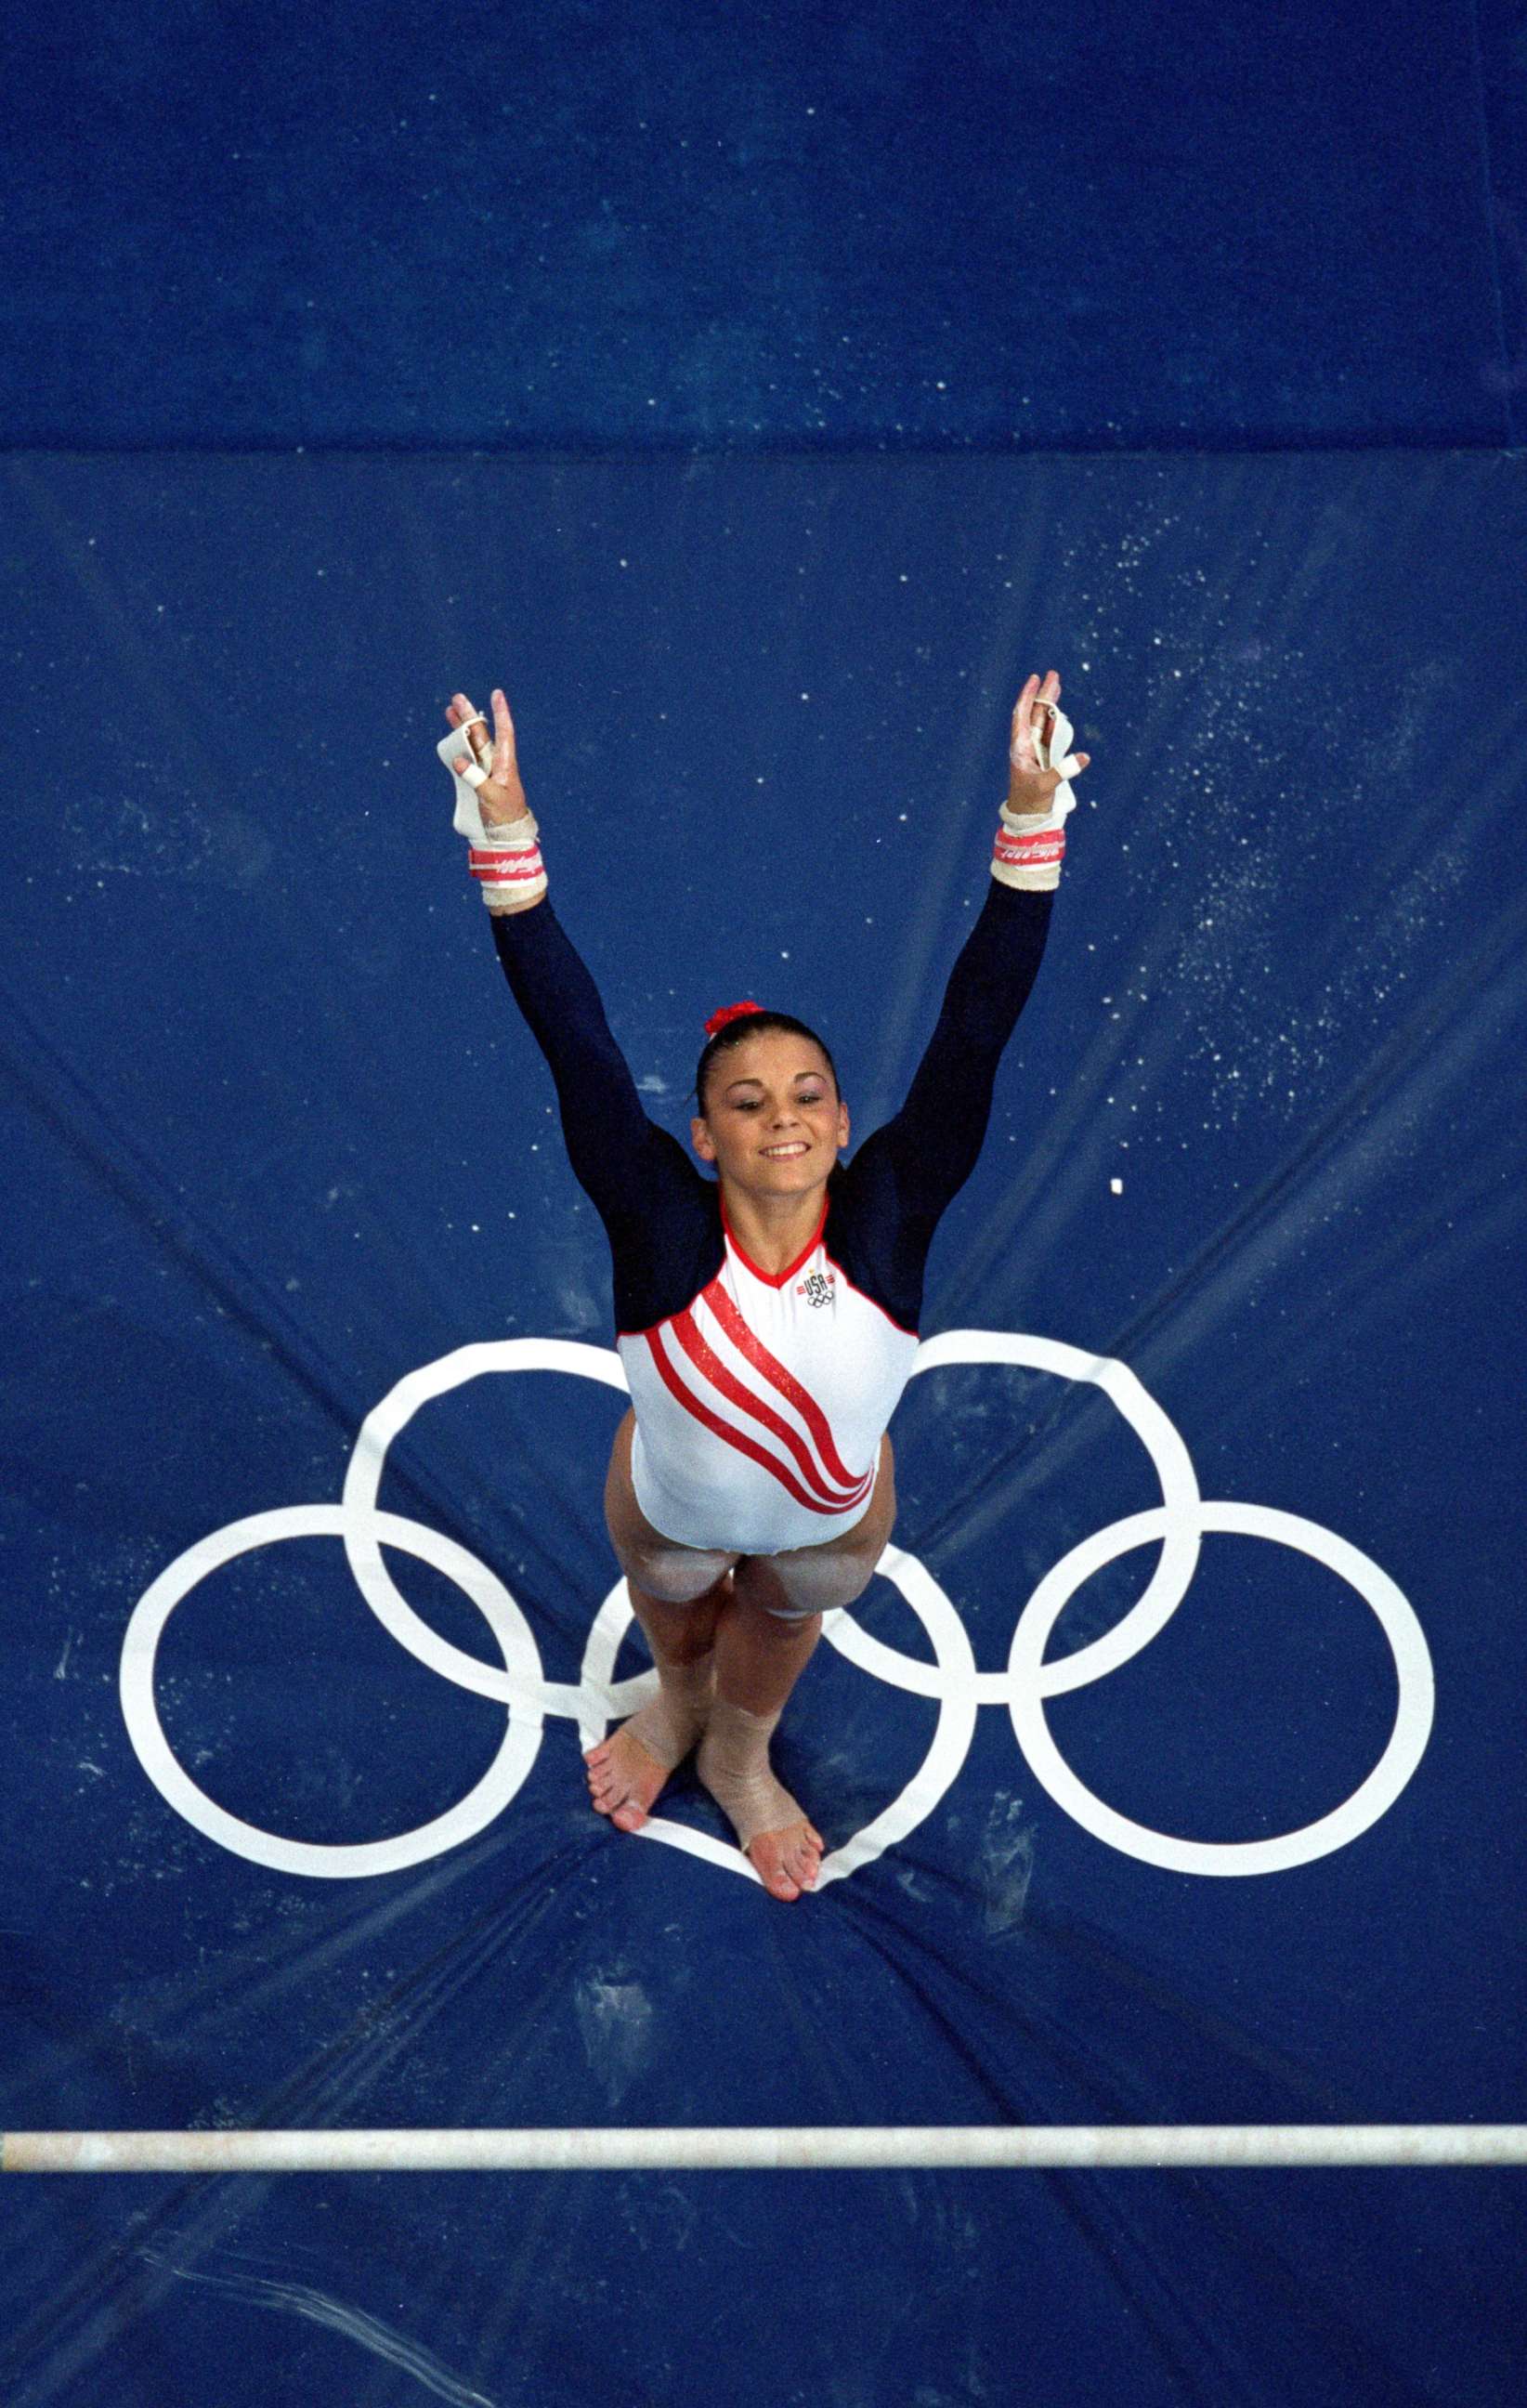 PHOTO: Jamie Dantzscher of the United States dismounts from the uneven bars during the Women's Gymnastics competition in the 2000 Olympics held in Sydney, Australia, Sept. 19, 2000.